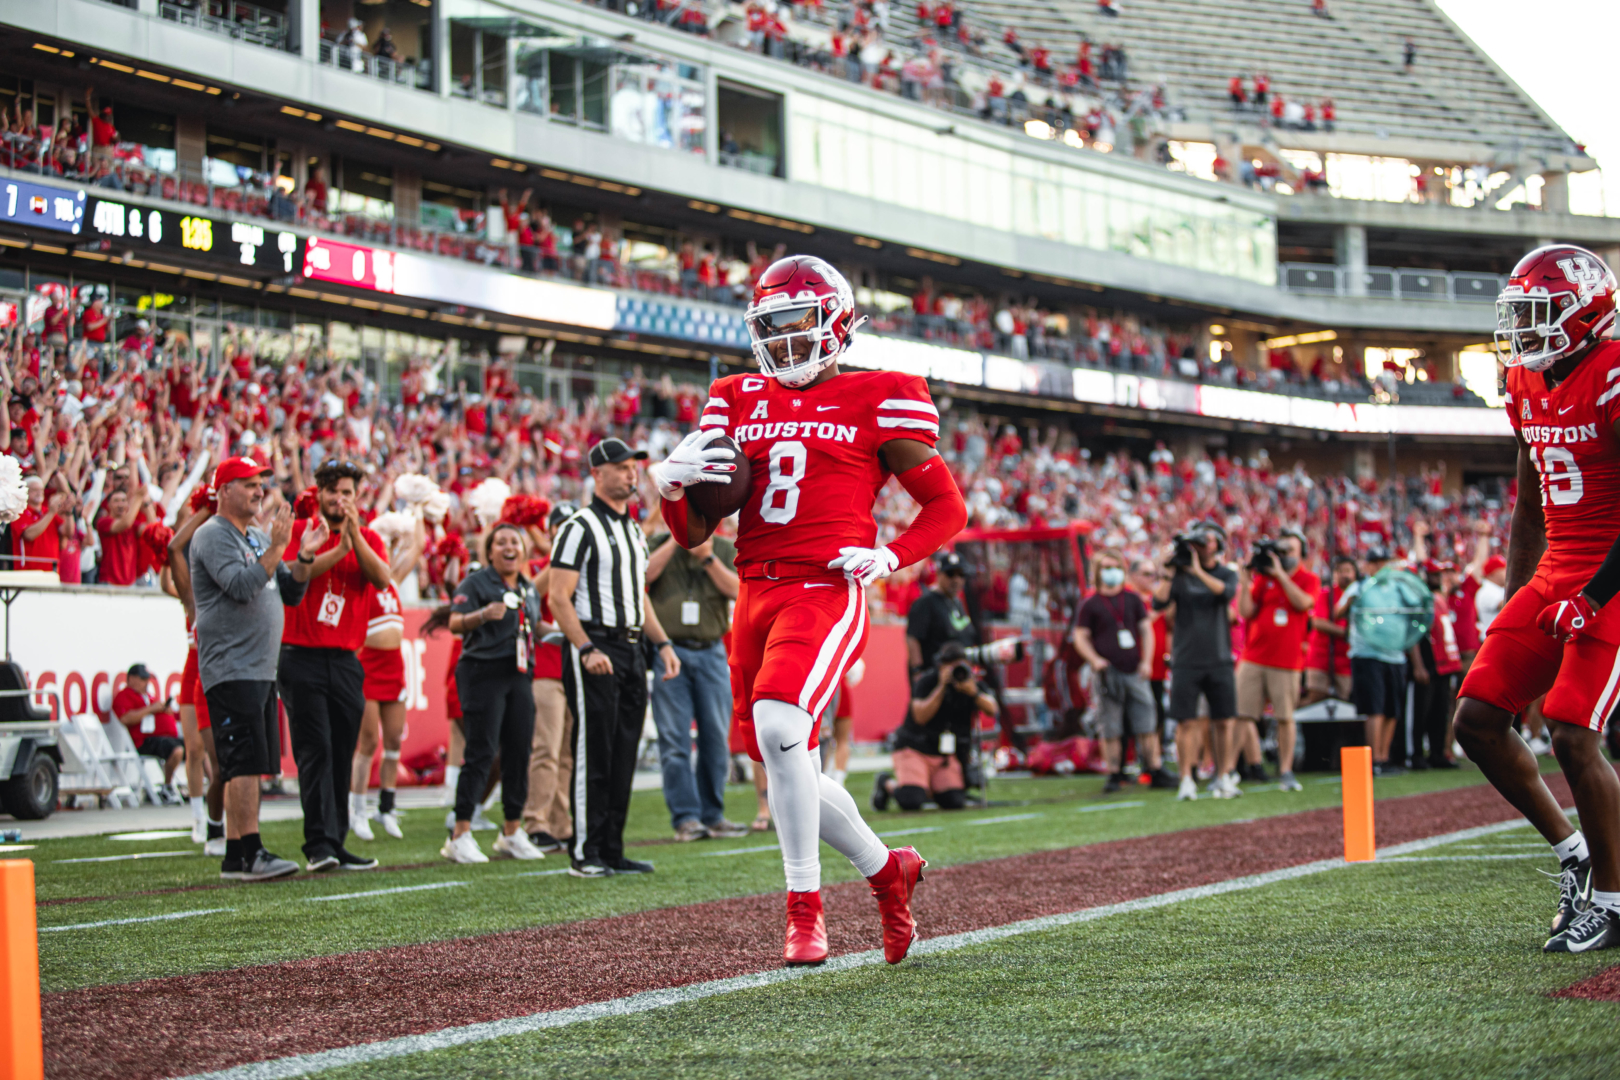 Marcus Jones, who UH football head coach Dana Holgorsen has described as a "Swiss Army Knife," is headed to New England after being selected by the Patriots in the third round of the 2022 NFL Draft. | James Schillinger/The Cougar